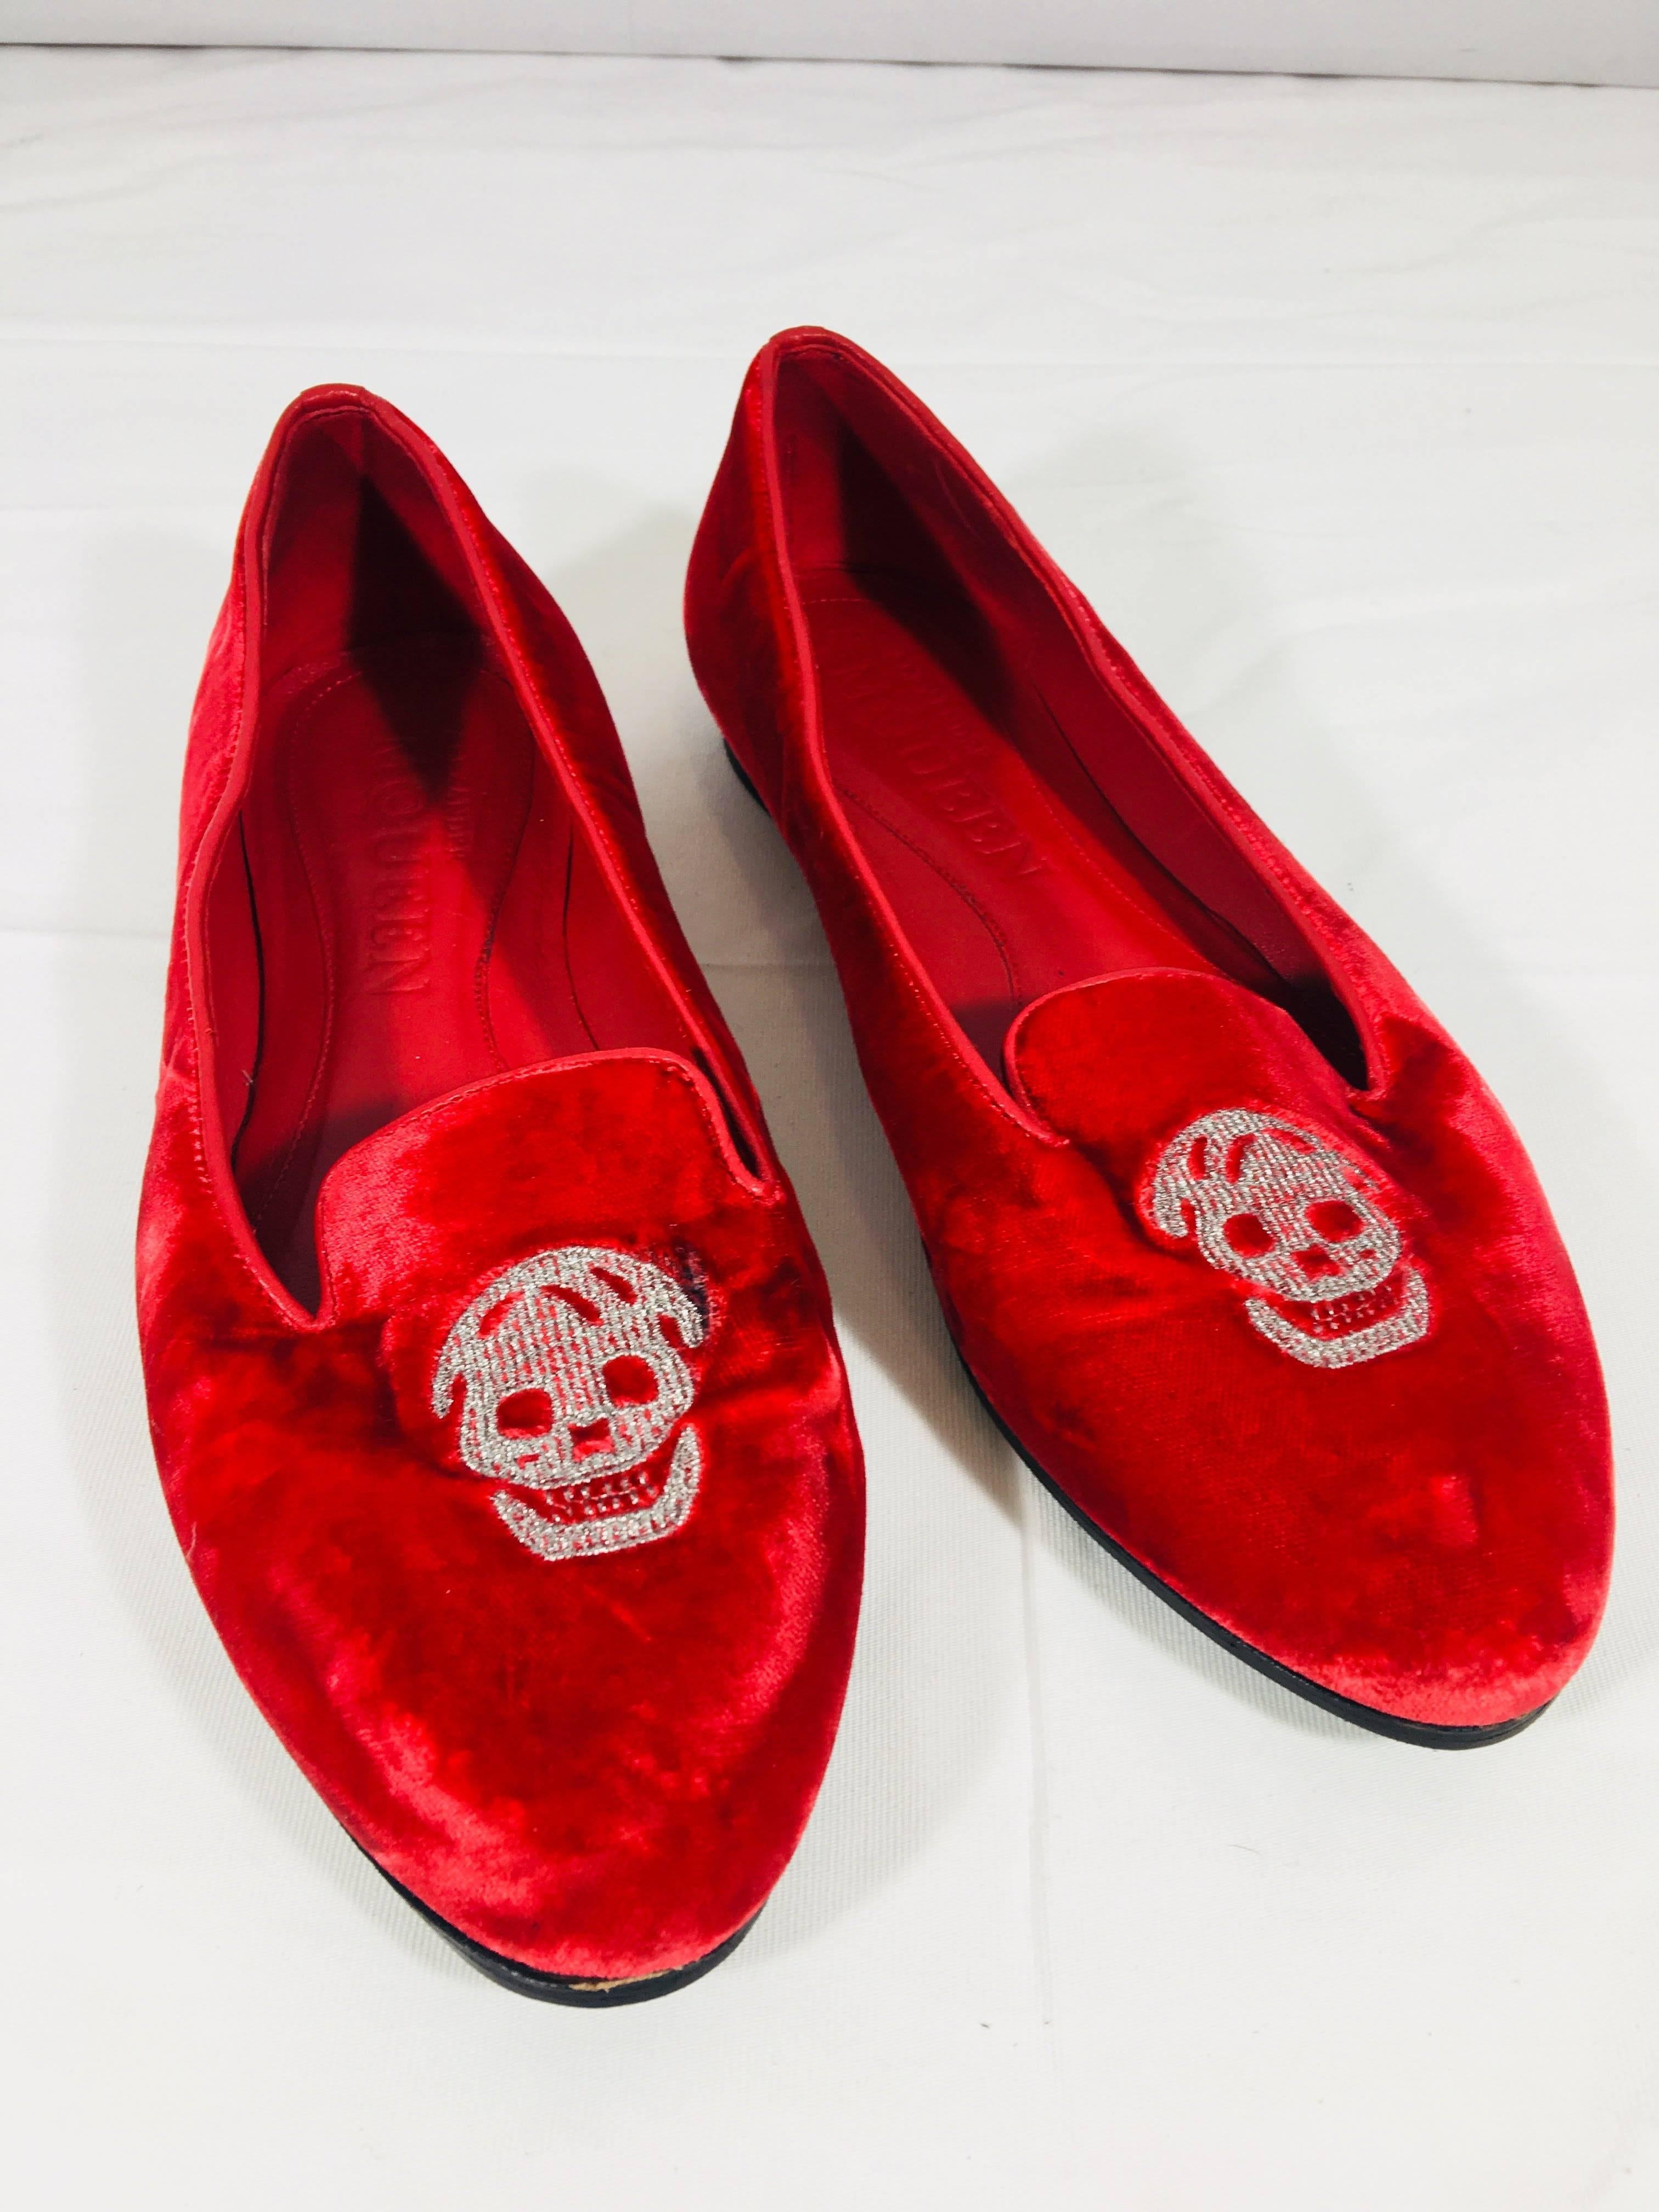 Alexander McQueen Red Velvet Loafers with Silver Embroidered Skulls.